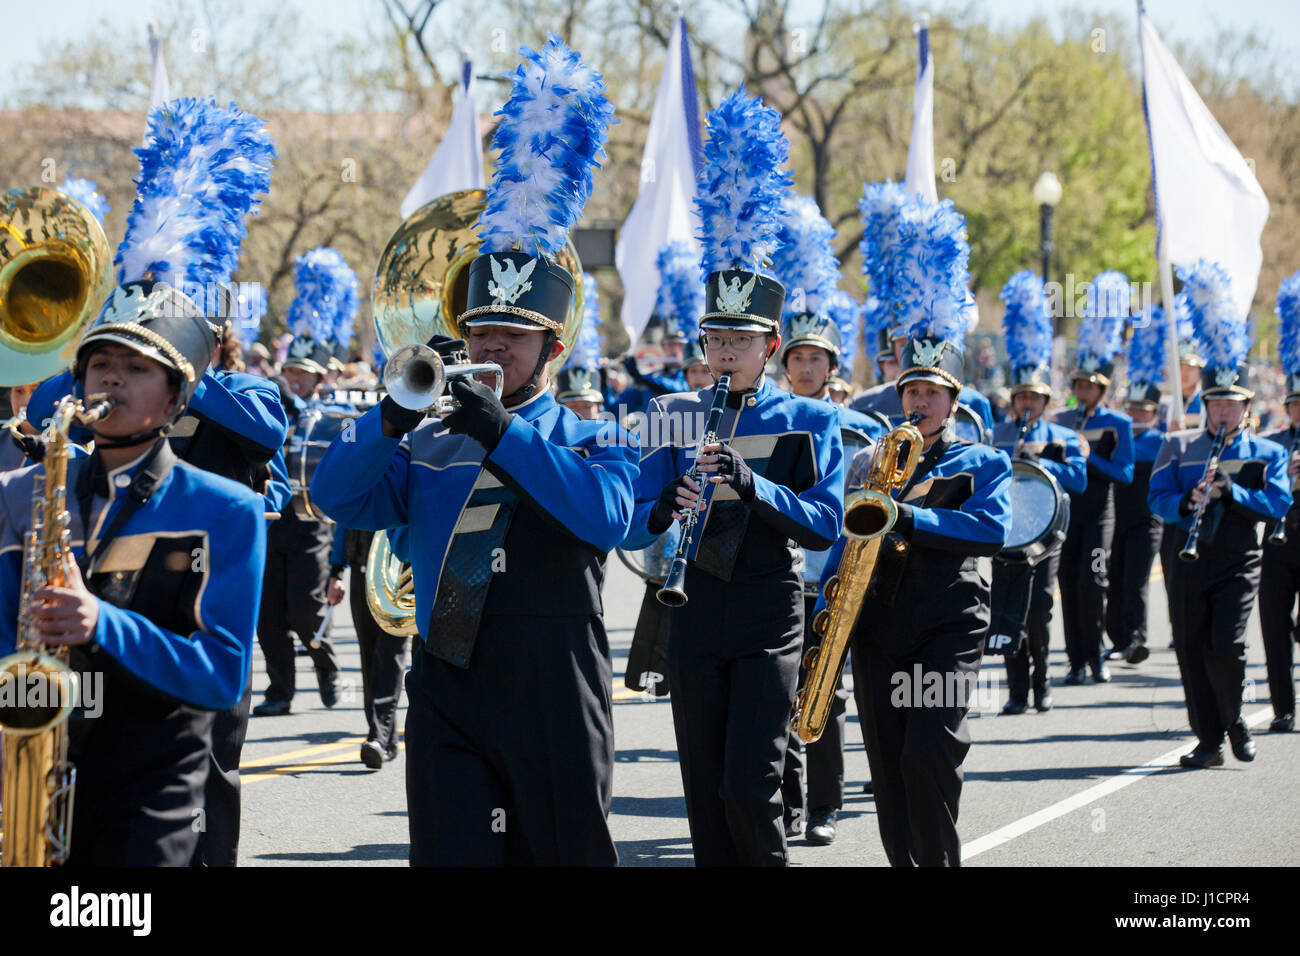 High school marching band participating in street parade - USA Stock Photo